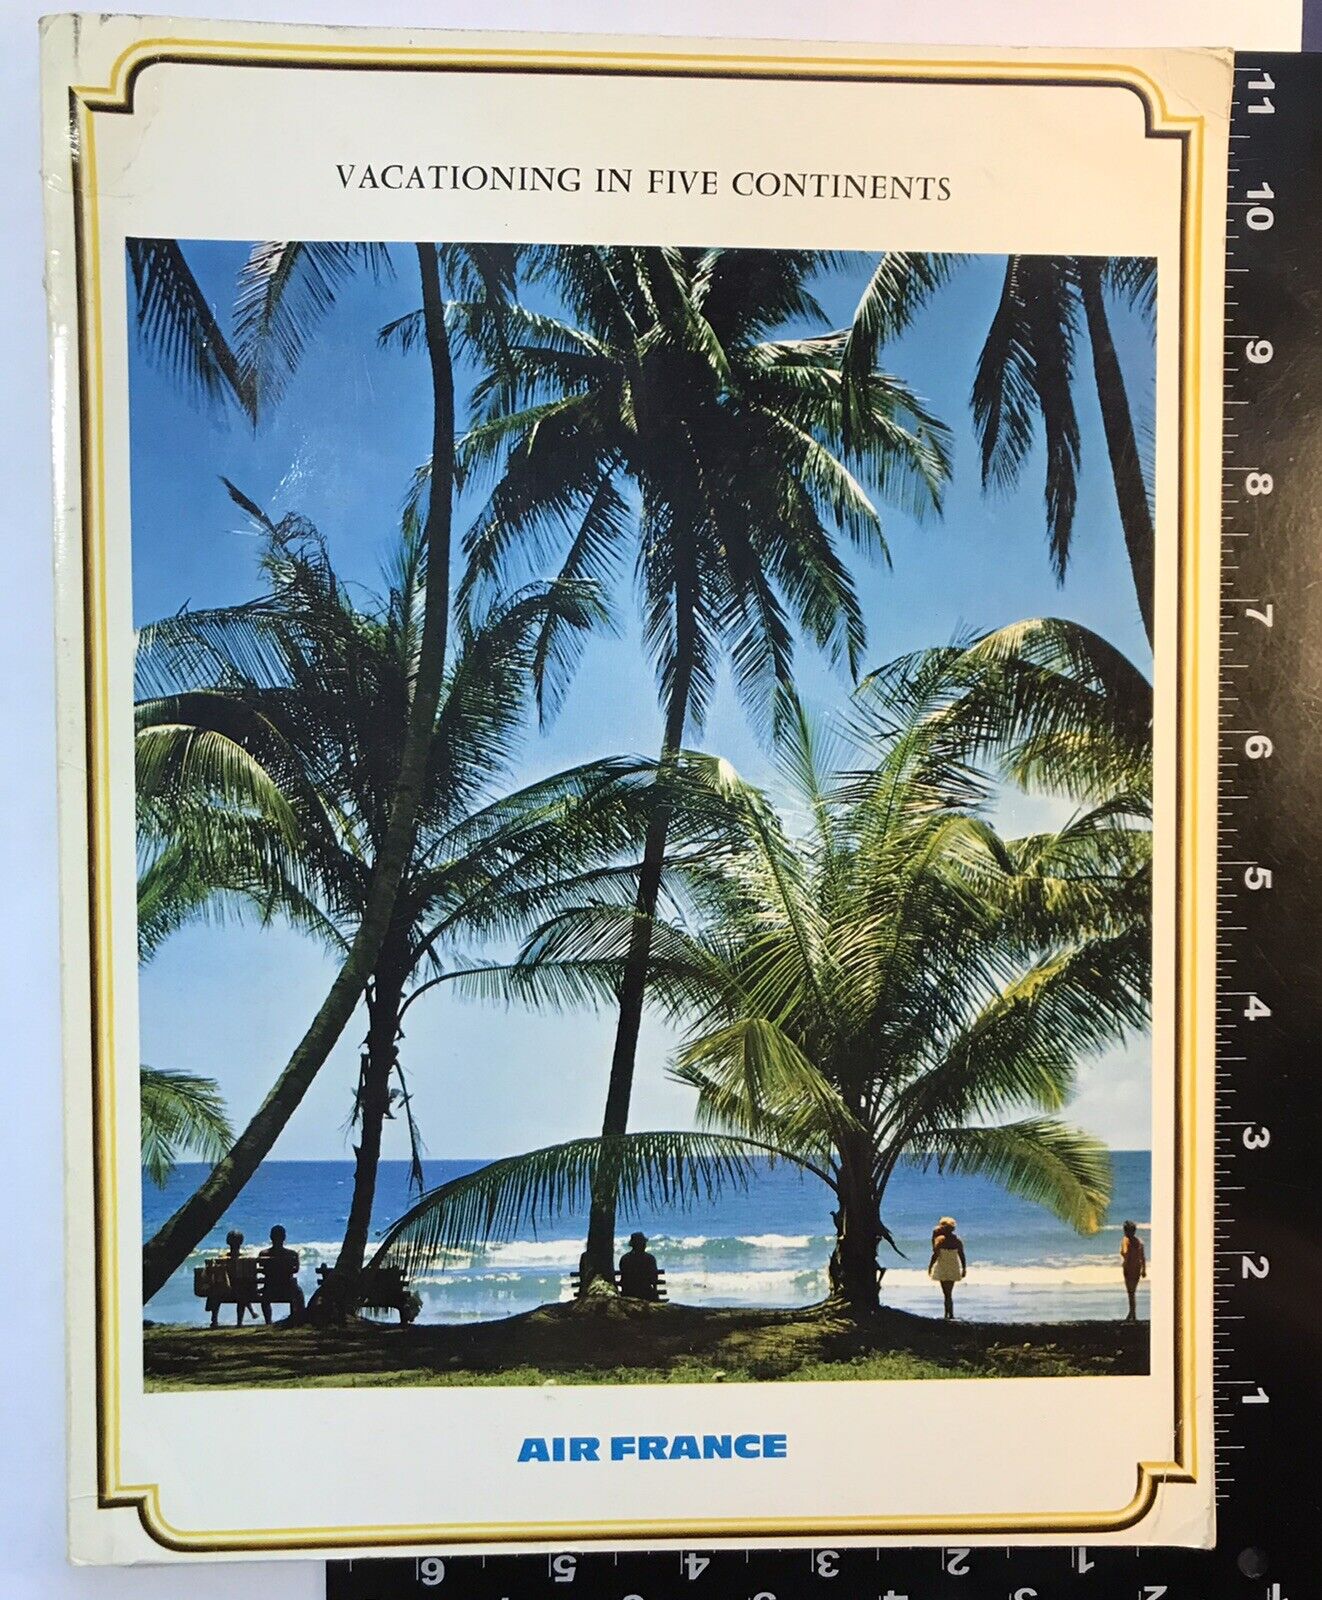 Air France Airlines Vintage Vacationing in Five Continents Travel Book 1960’s